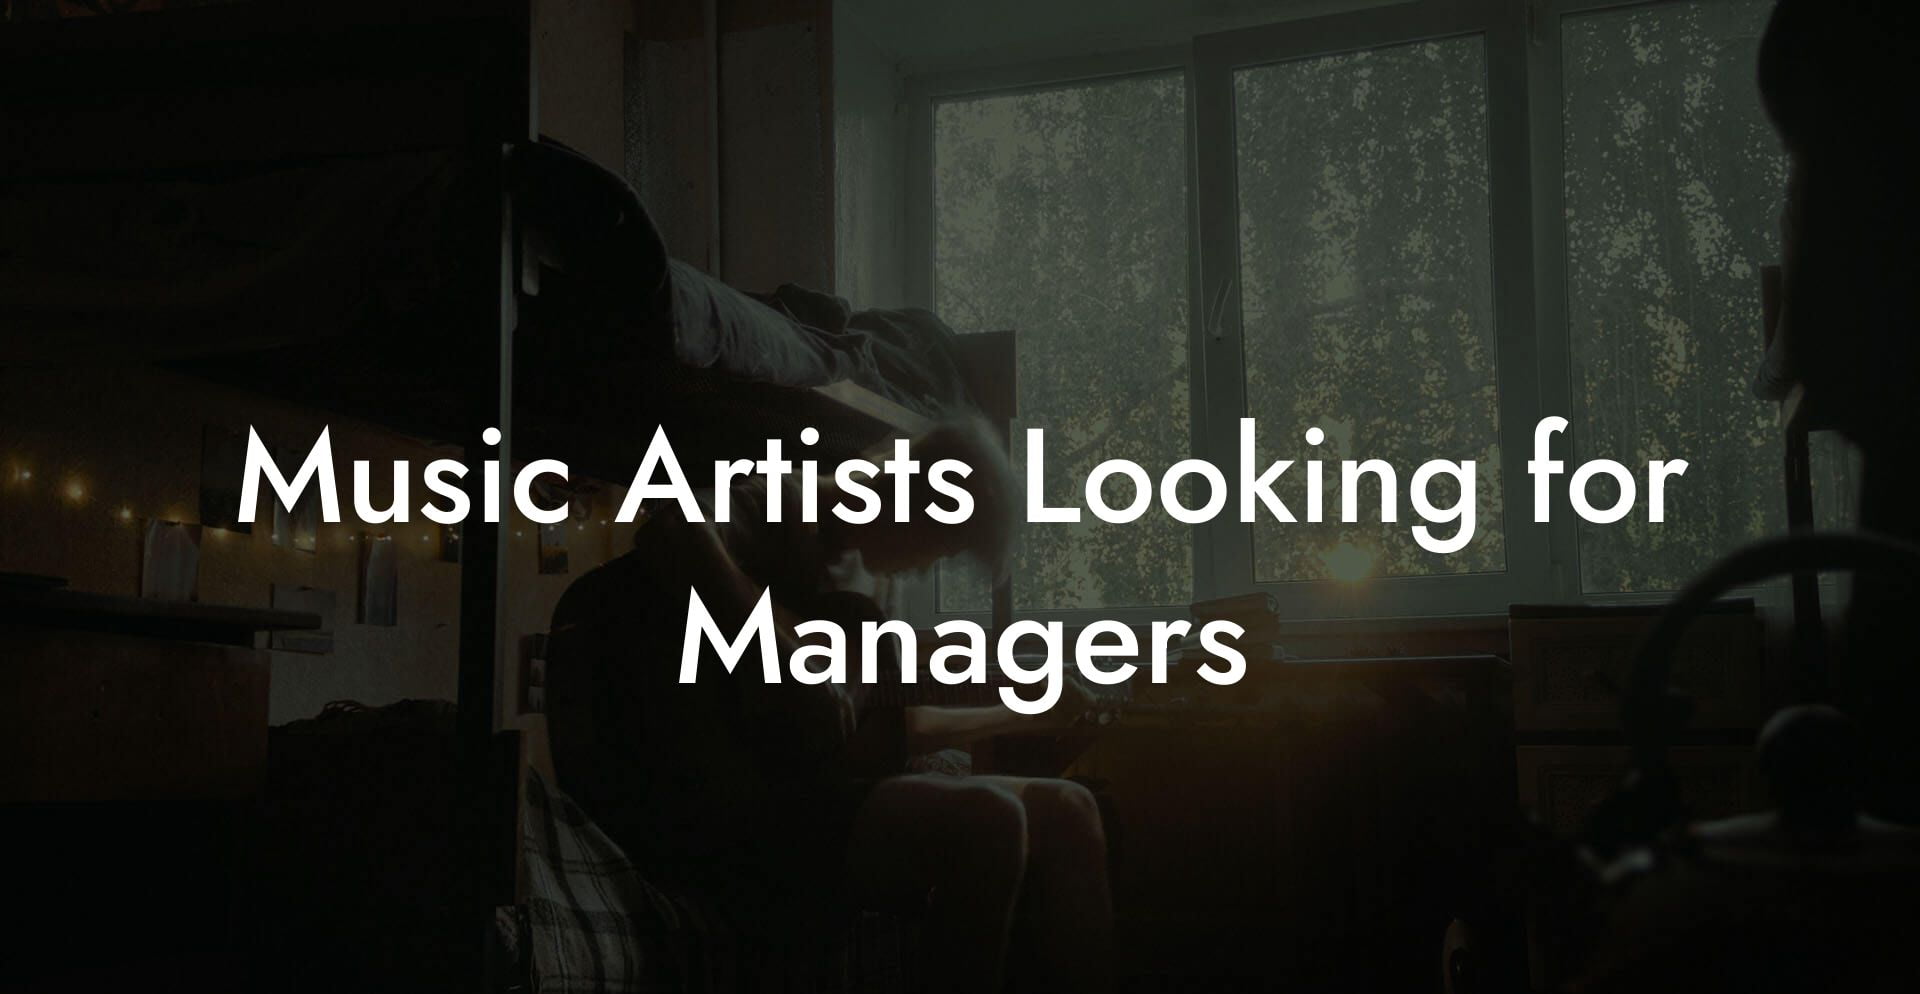 Music Artists Looking for Managers